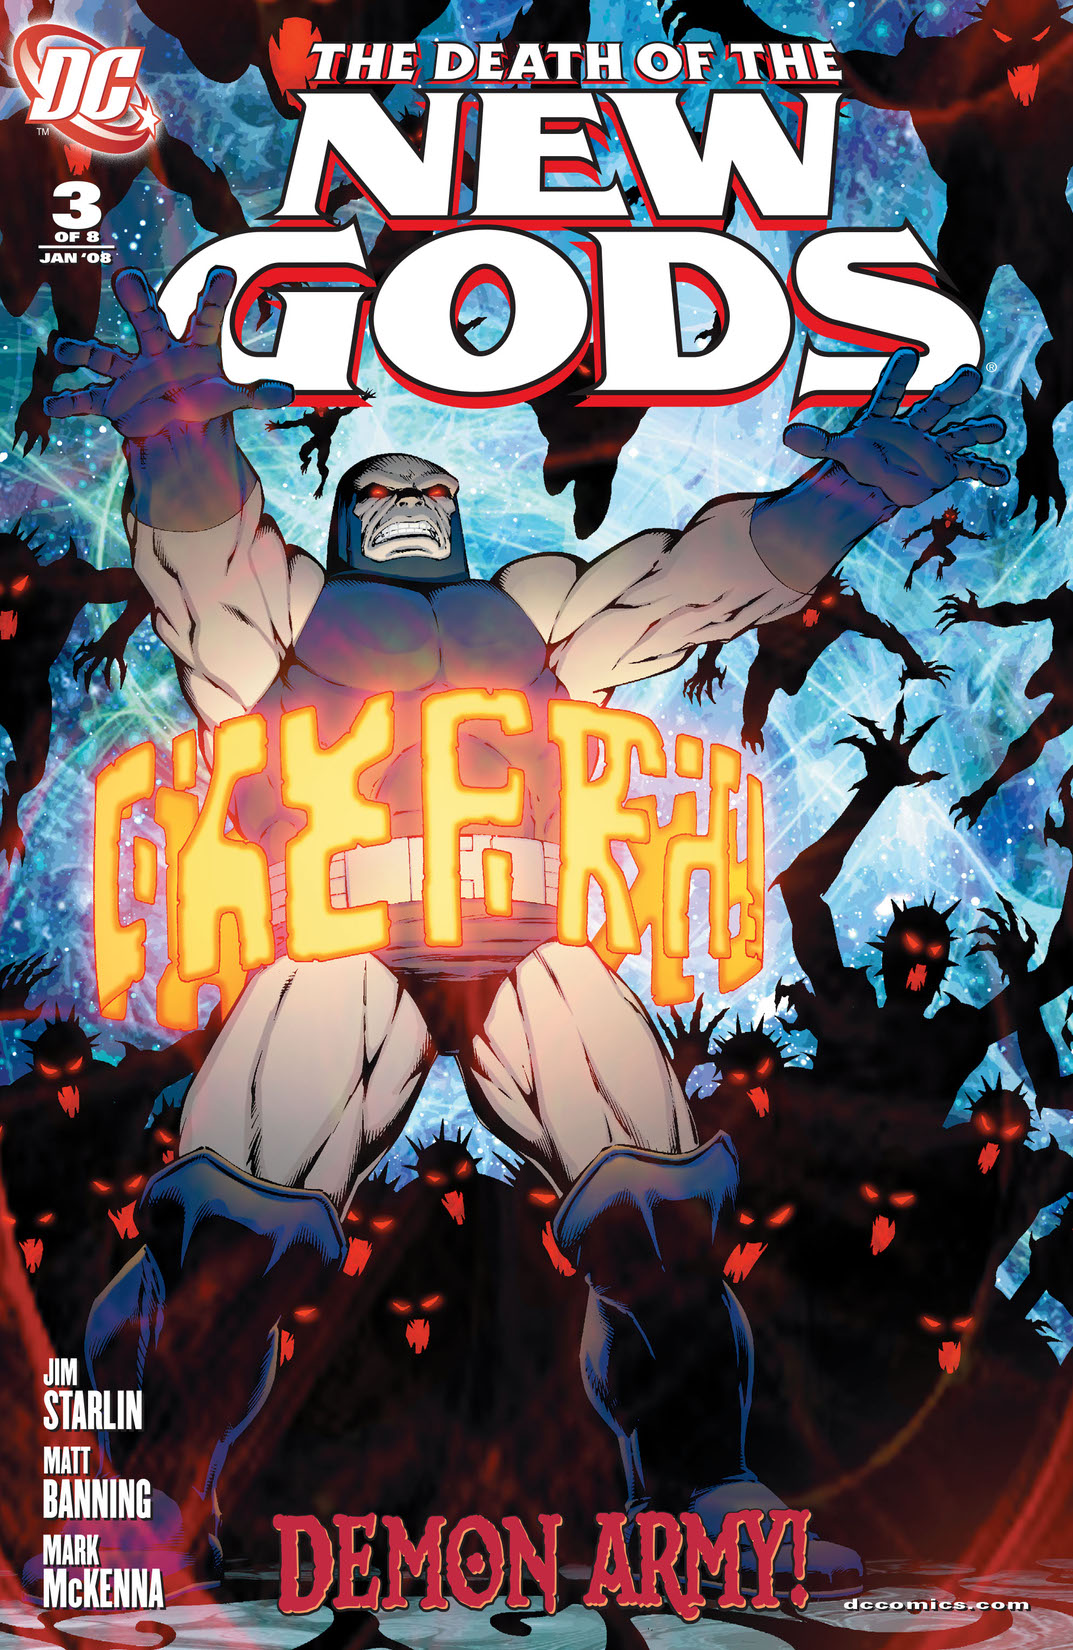 Death of the New Gods #3 preview images